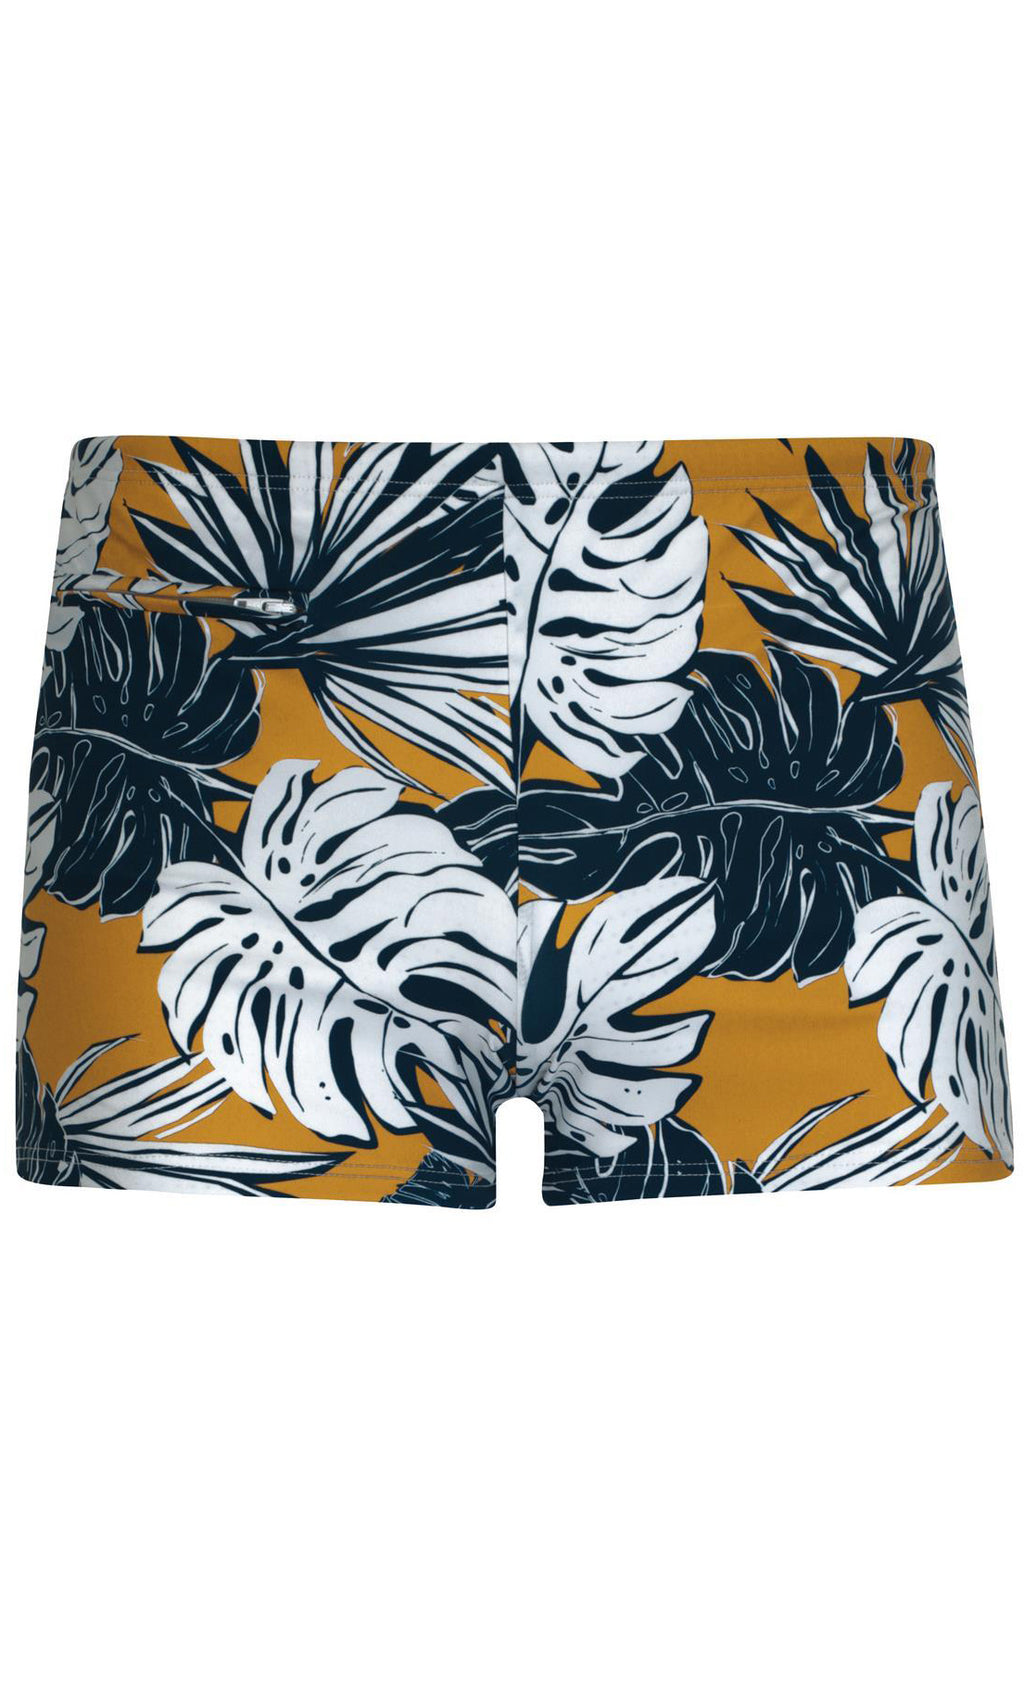 Premium Fern Trunks, More Colours, Special Order S - XL